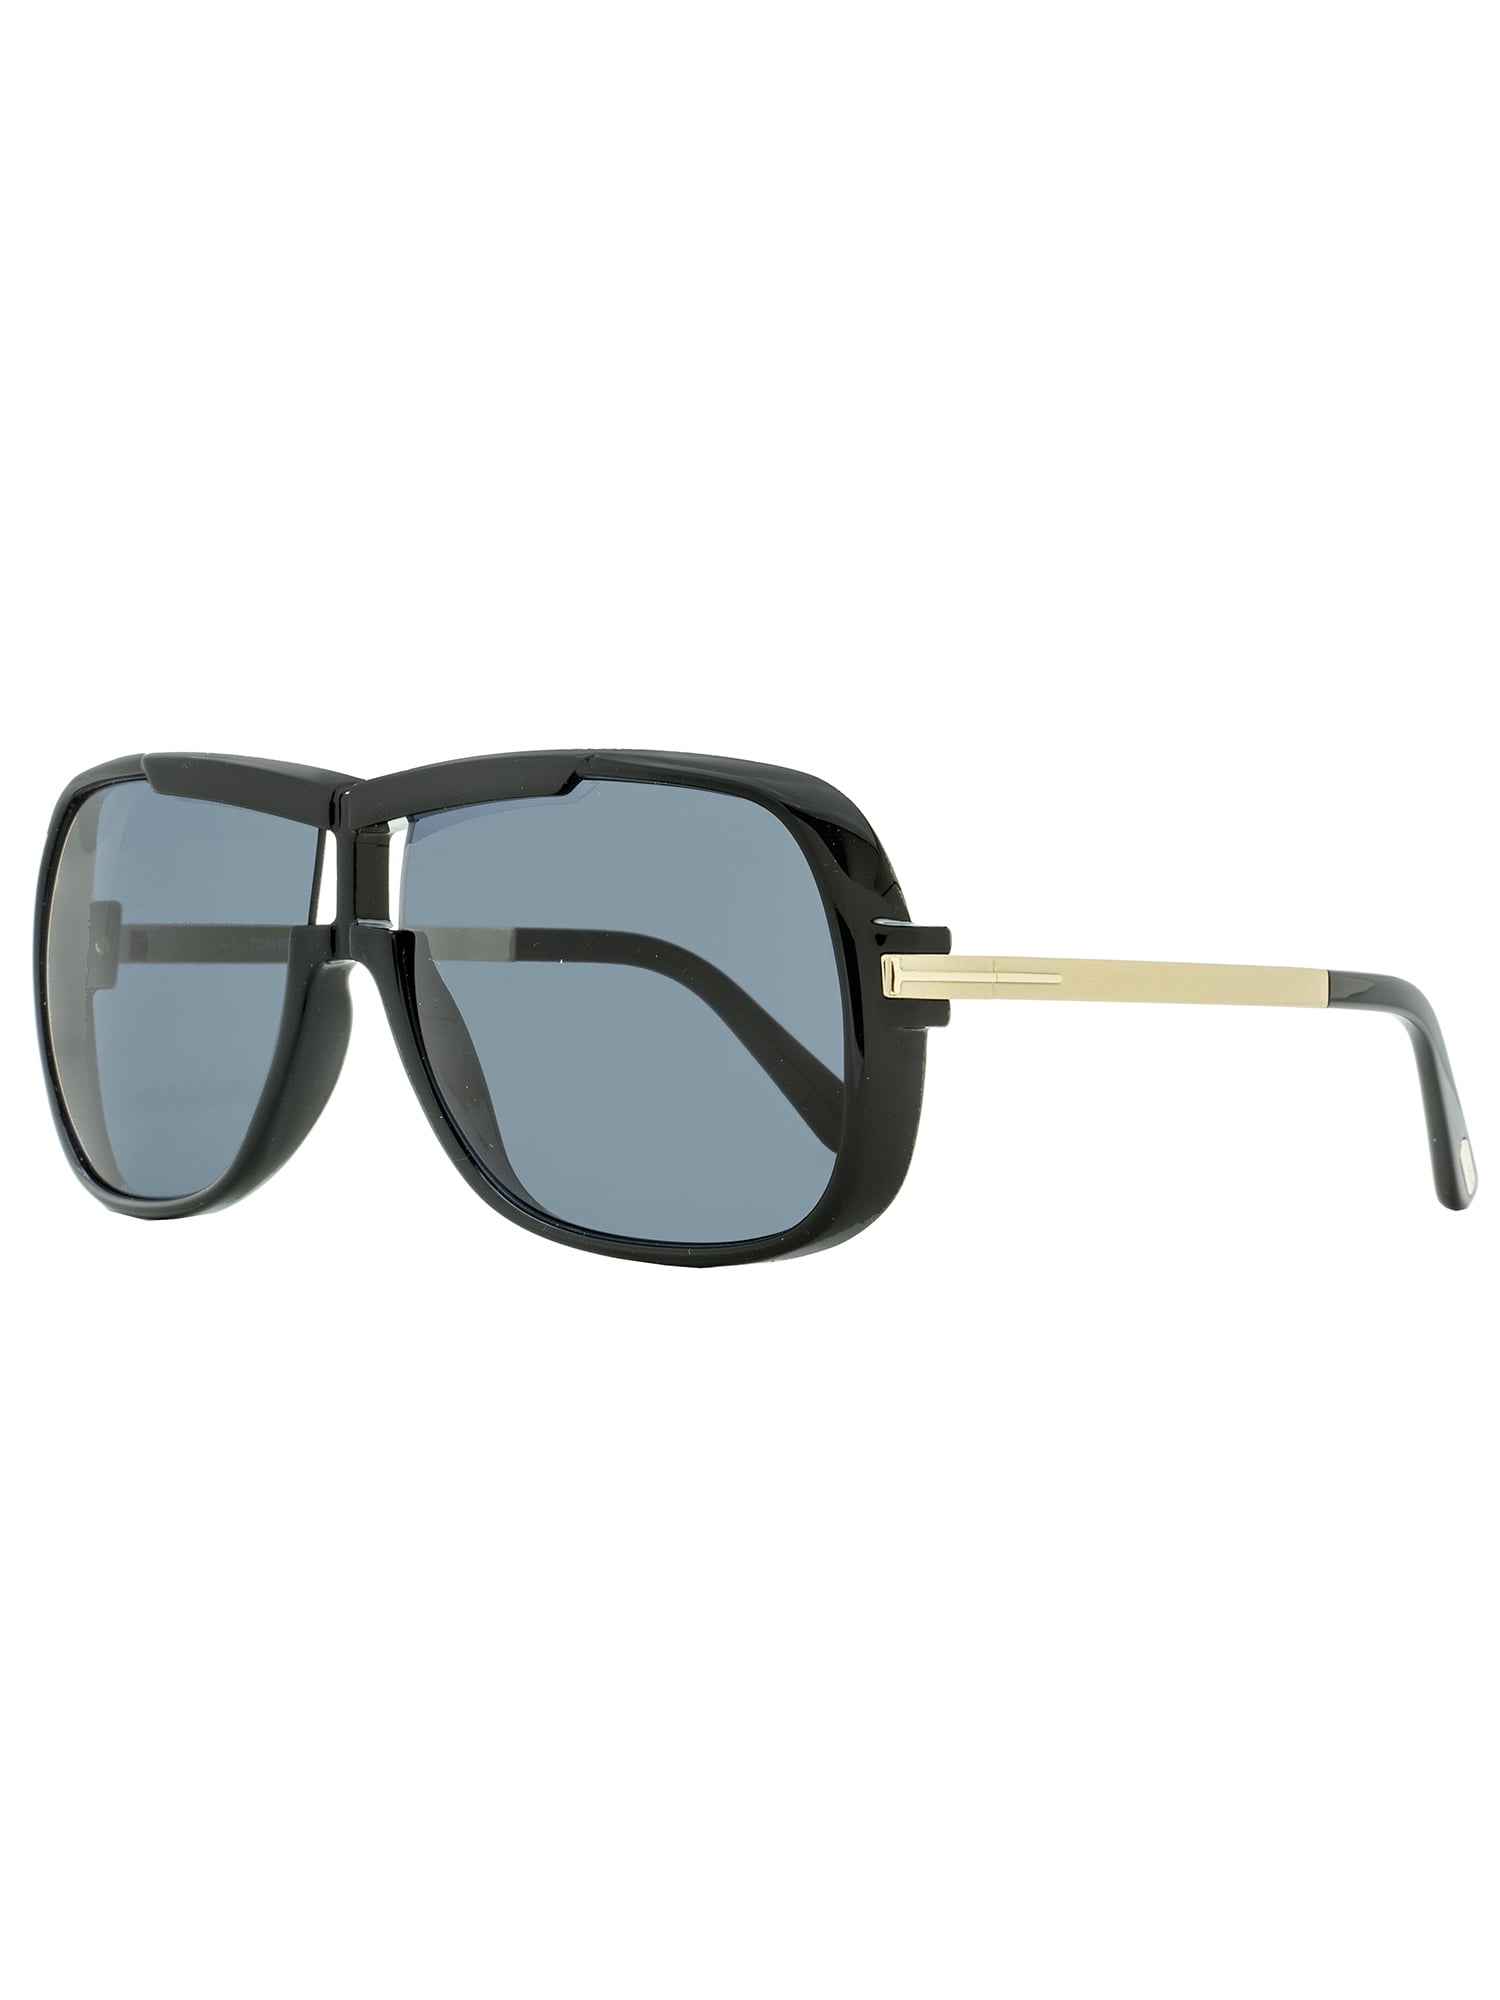 Tom Ford Square Sunglasses TF800 Caine 01A Black/Gold 62mm FT0800